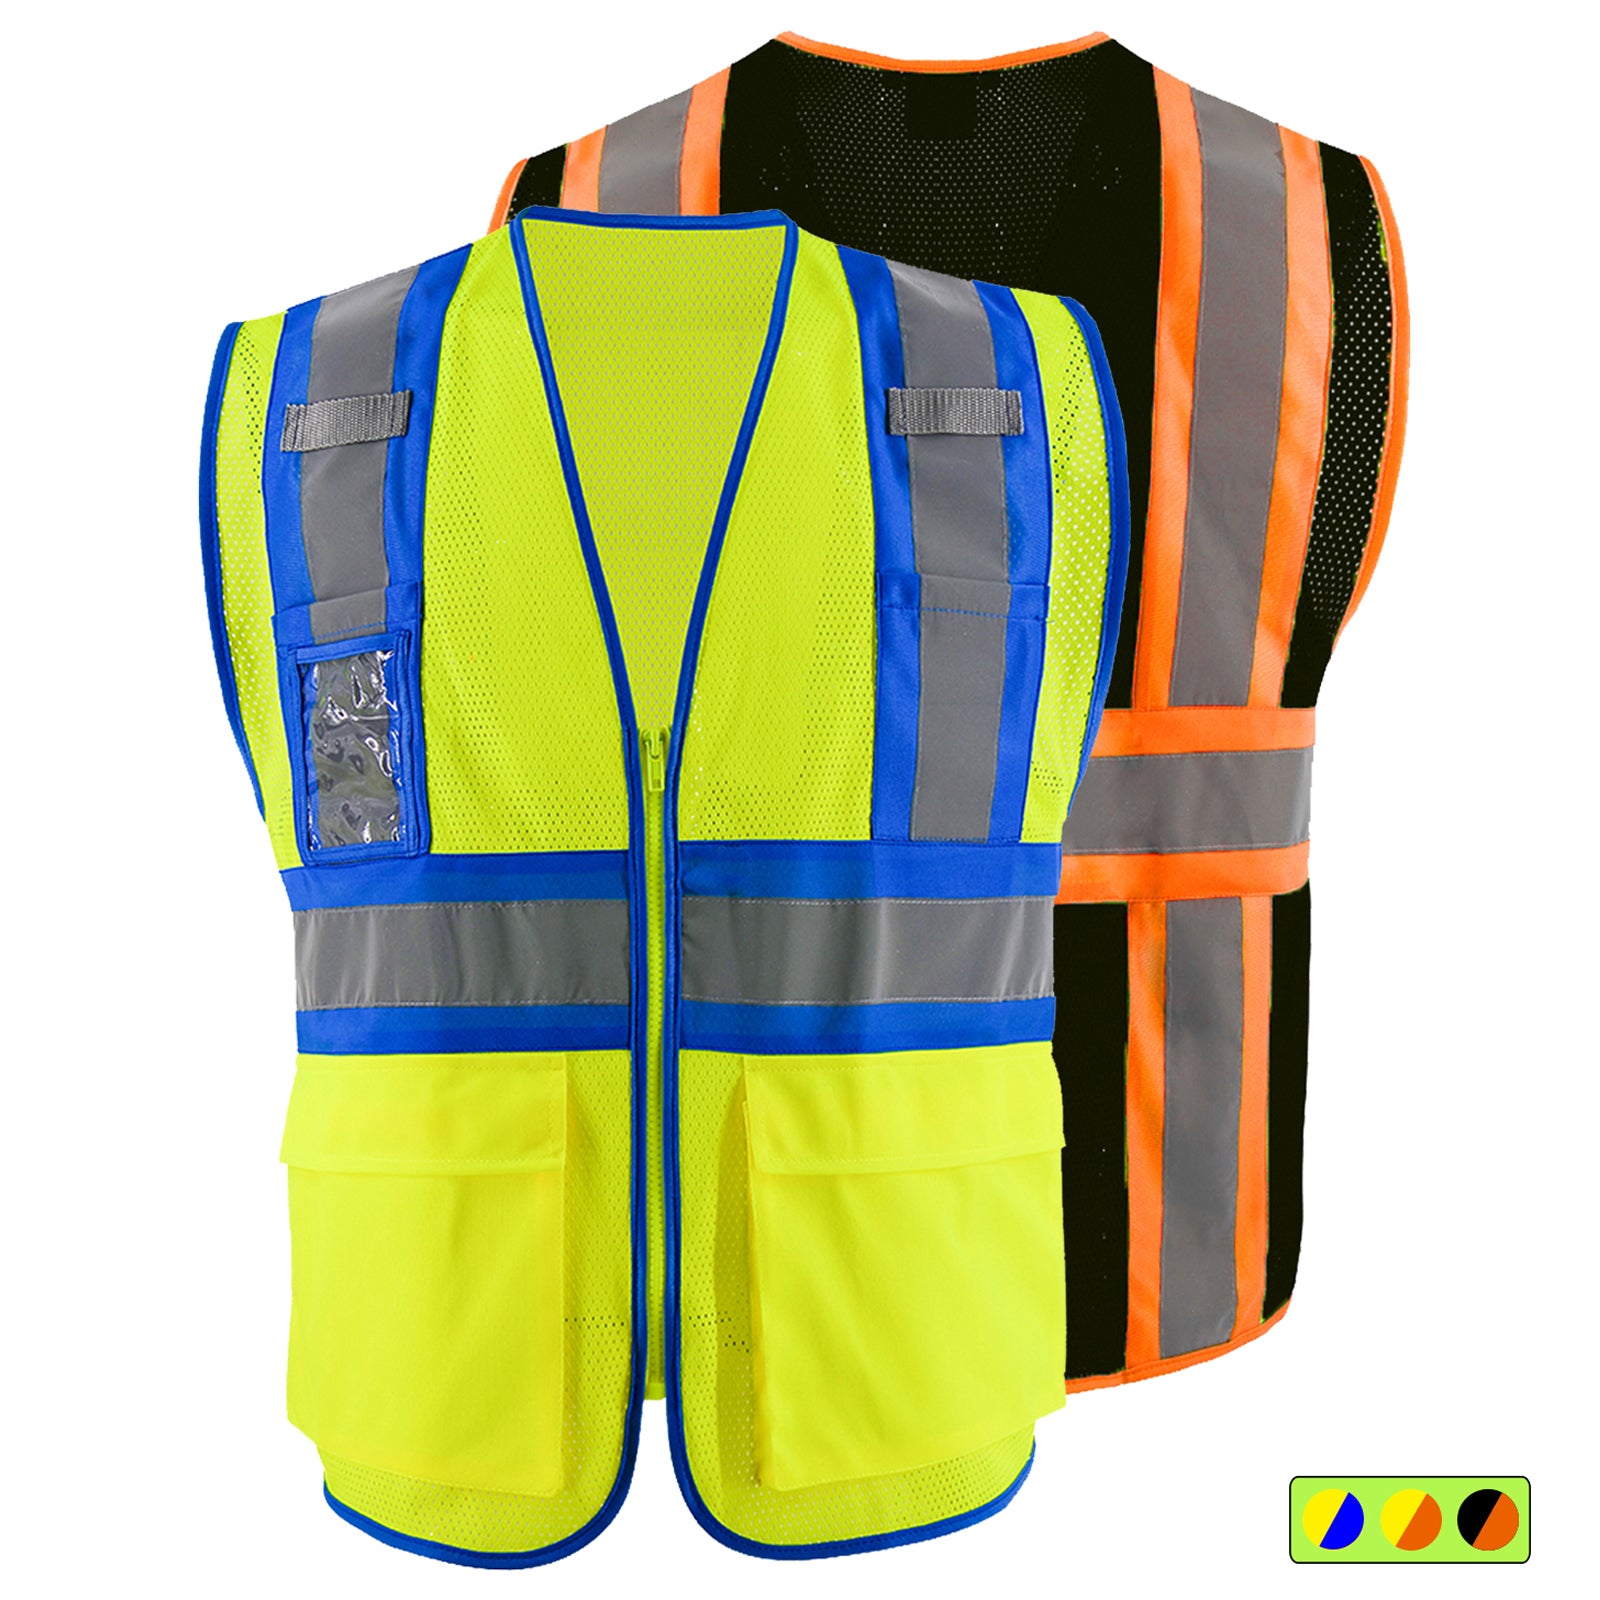 SMASYS High Visibility Reflective Safety Vest with 5 Pockets and